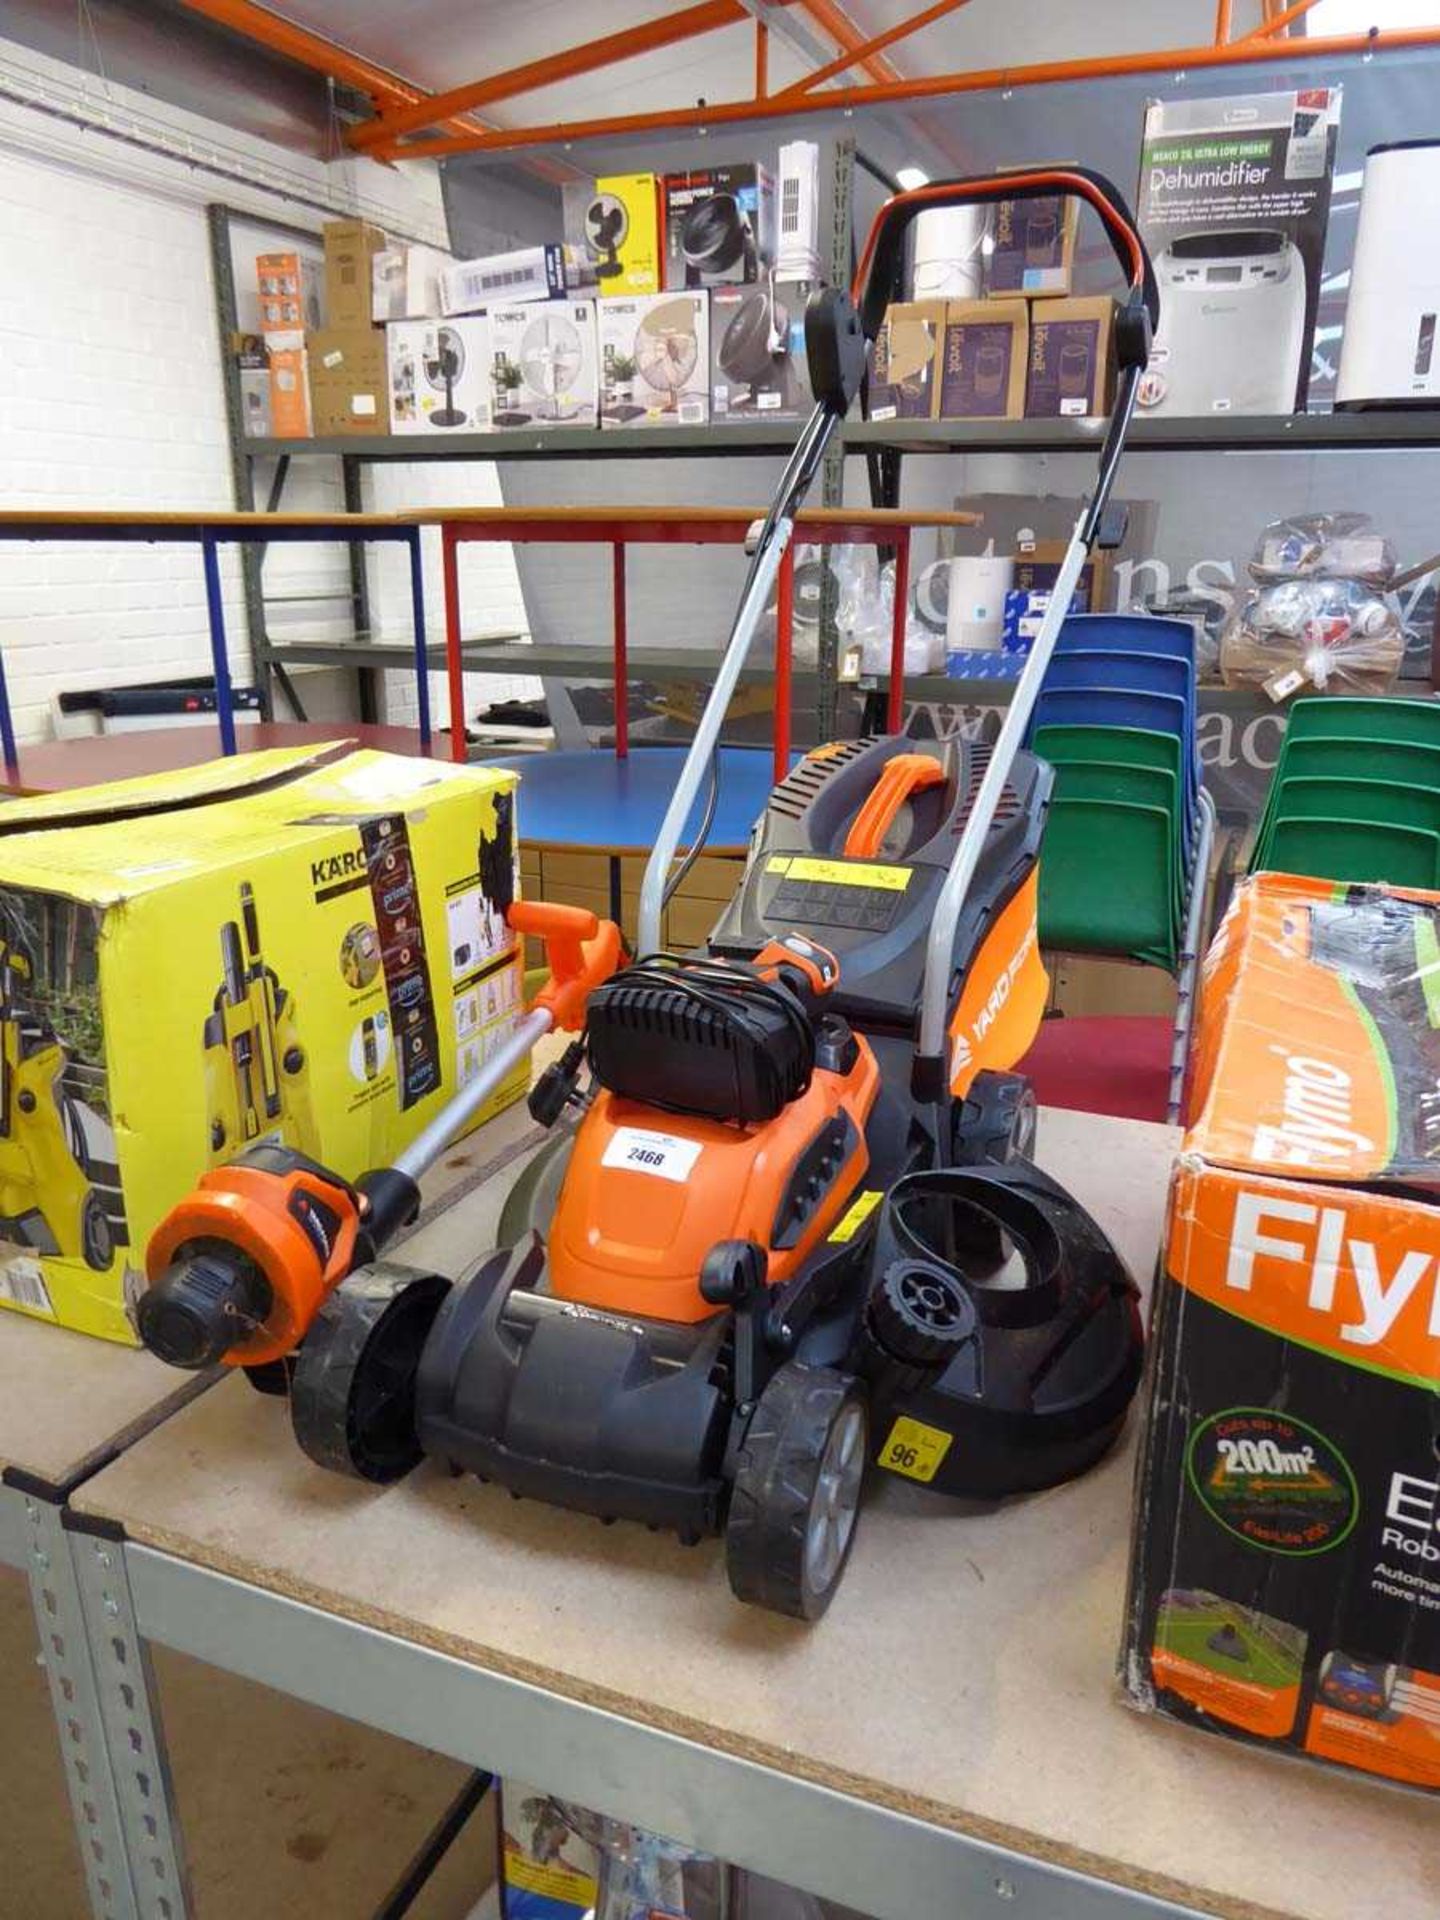 +VAT Yard force cordless lawnmower with matching cordless strimmer, 1 battery and charger